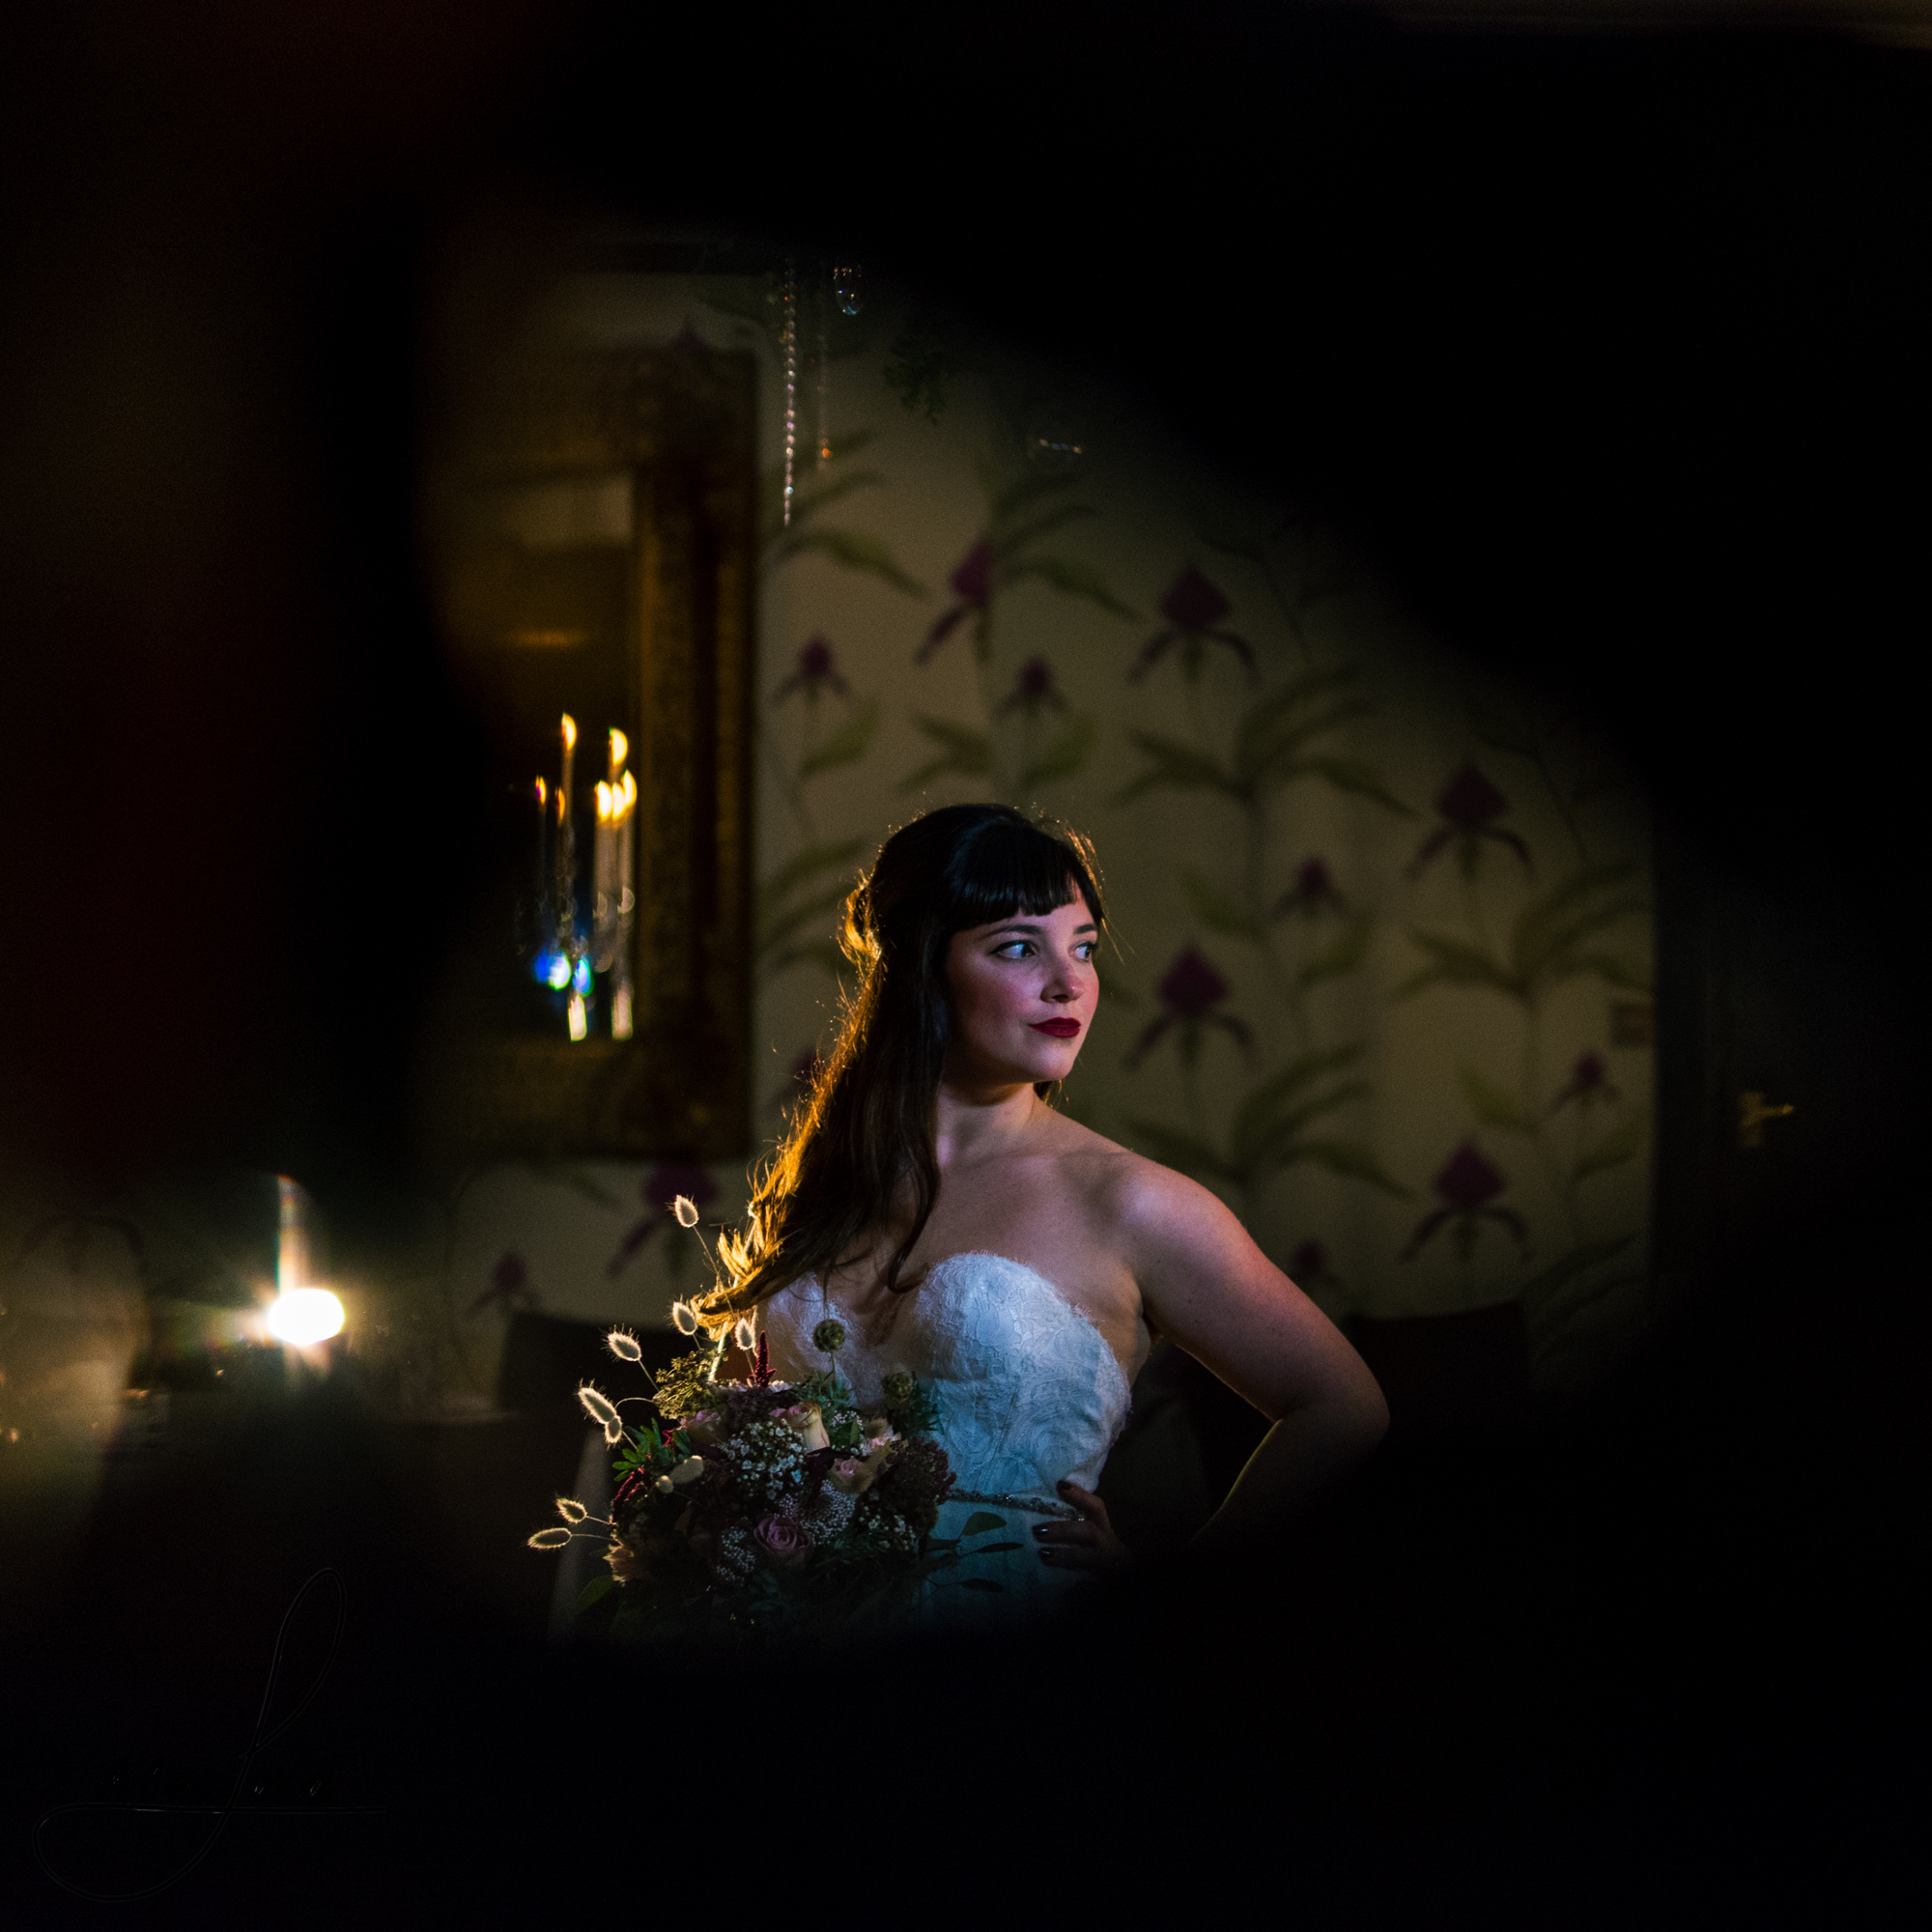 black vignette surrounds the bride standing surrounded by candles